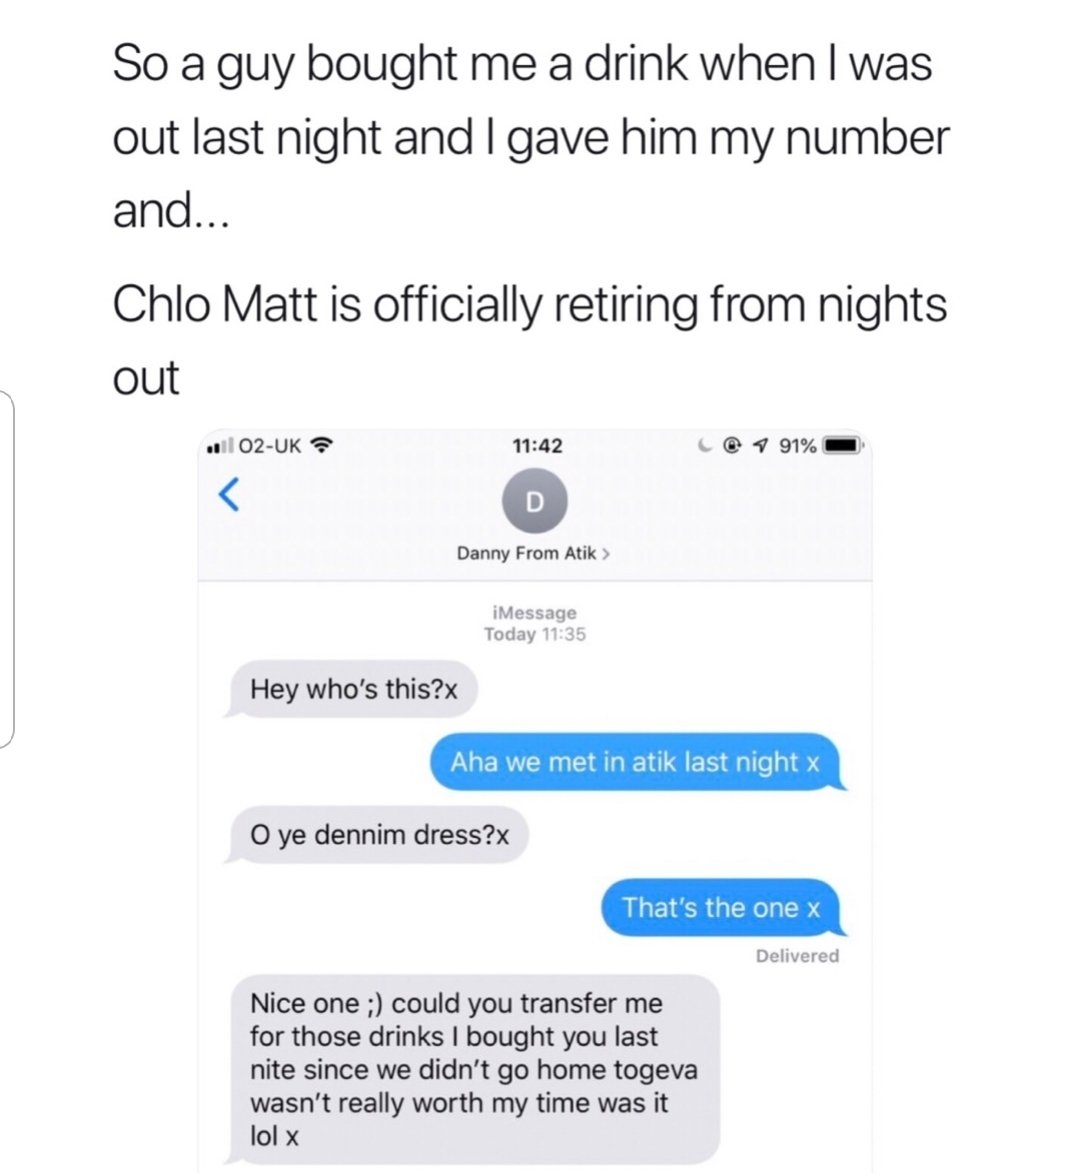 number - So a guy bought me a drink when I was out last night and I gave him my number and... Chlo Matt is officially retiring from nights out . 02Uk C@ 791% Danny From Atik > Message Today Hey who's this?x Aha we met in atik last night x Oye dennim dress